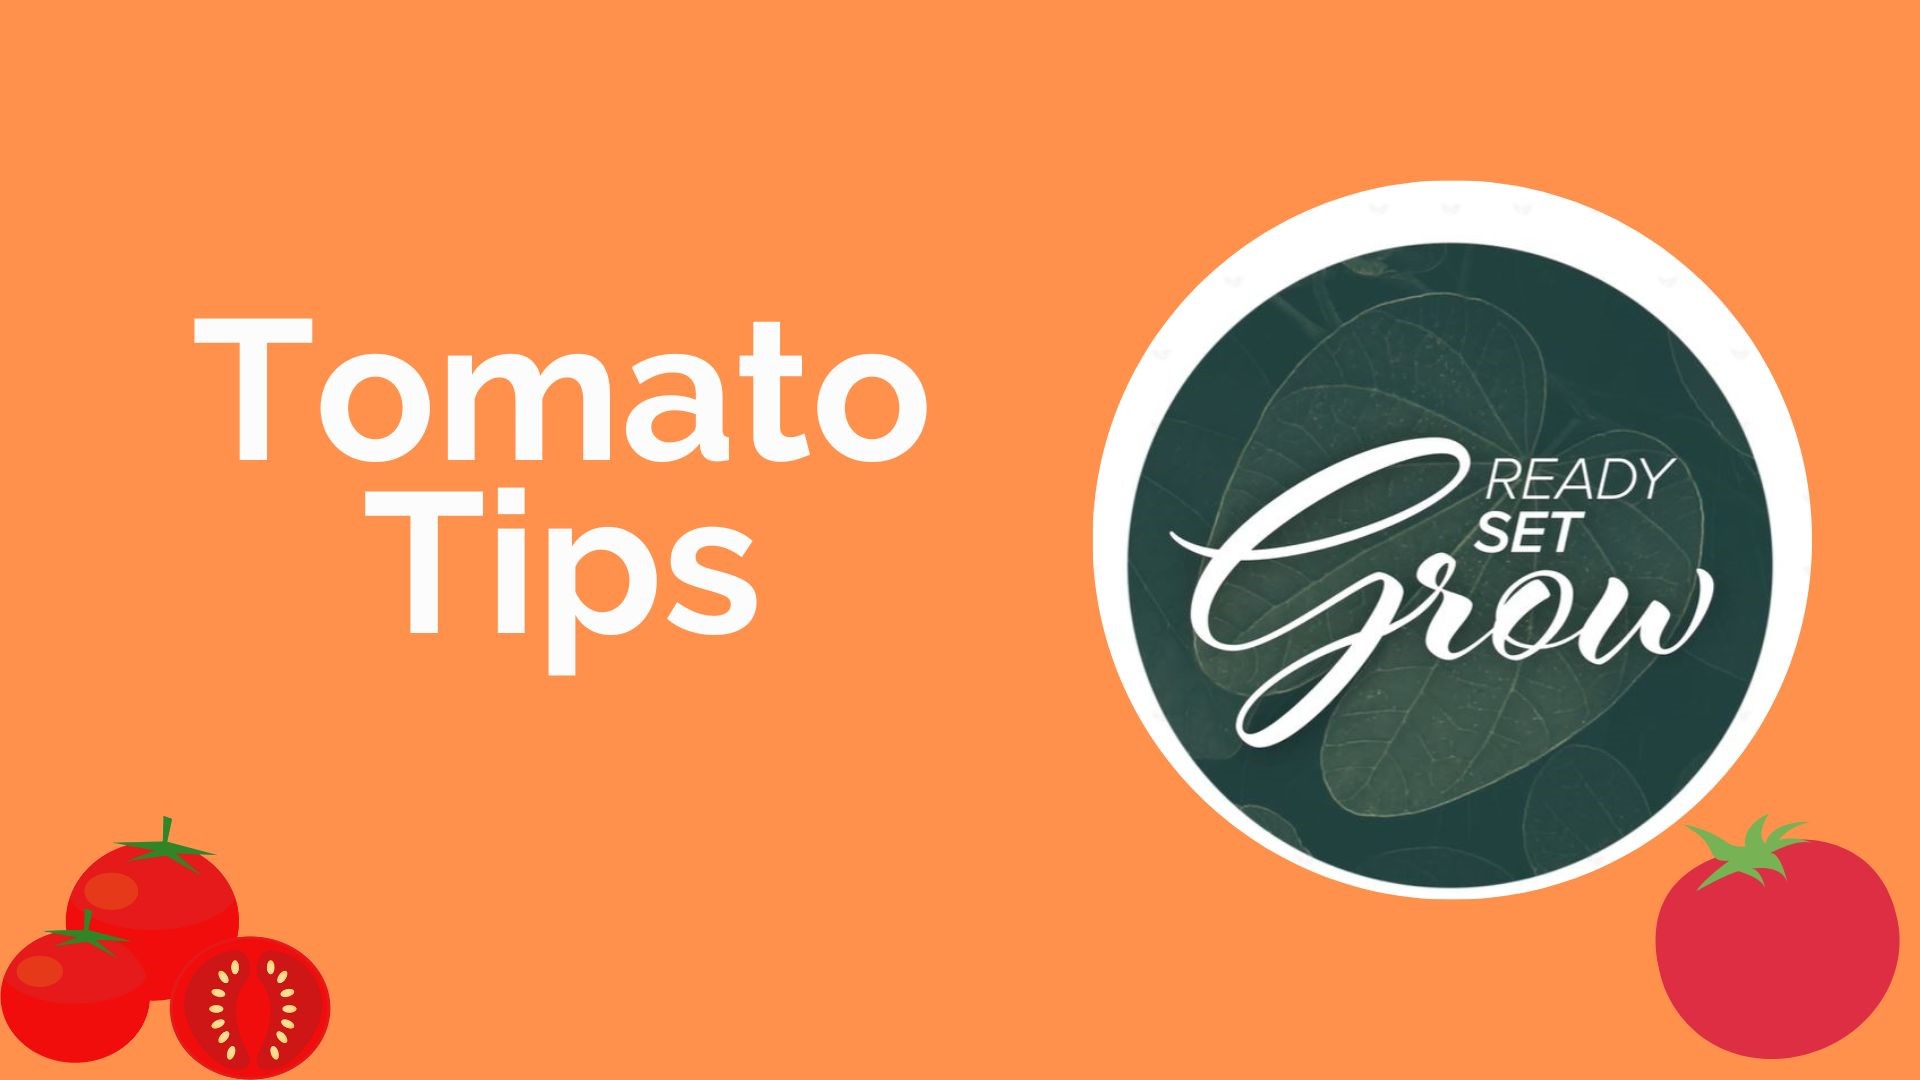 A complete guide of how to care for your tomatoes from KARE's Laura Betker and Bobby Jensen.